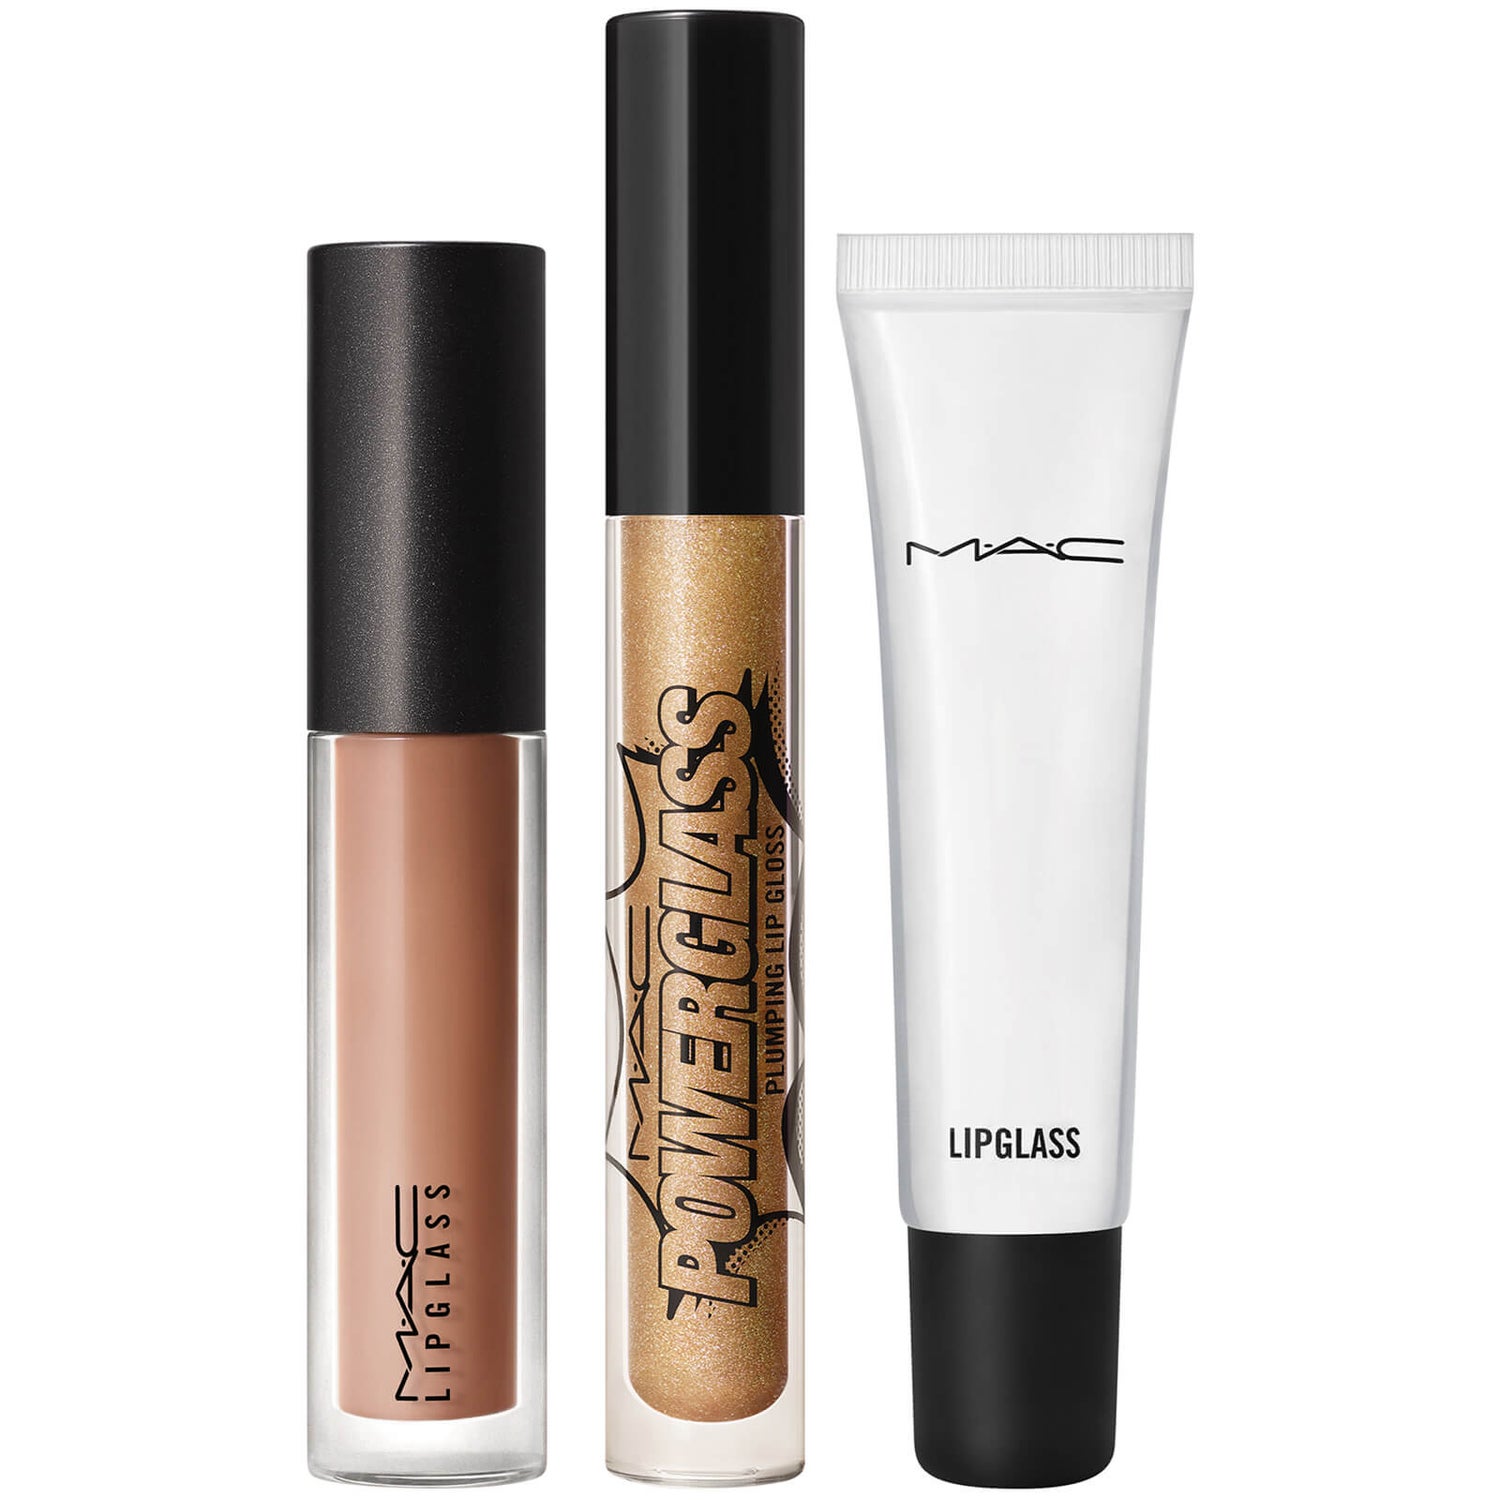 MAC Cheers To You! Lipglass Kit - Sparkling Wine (Worth £58.00)